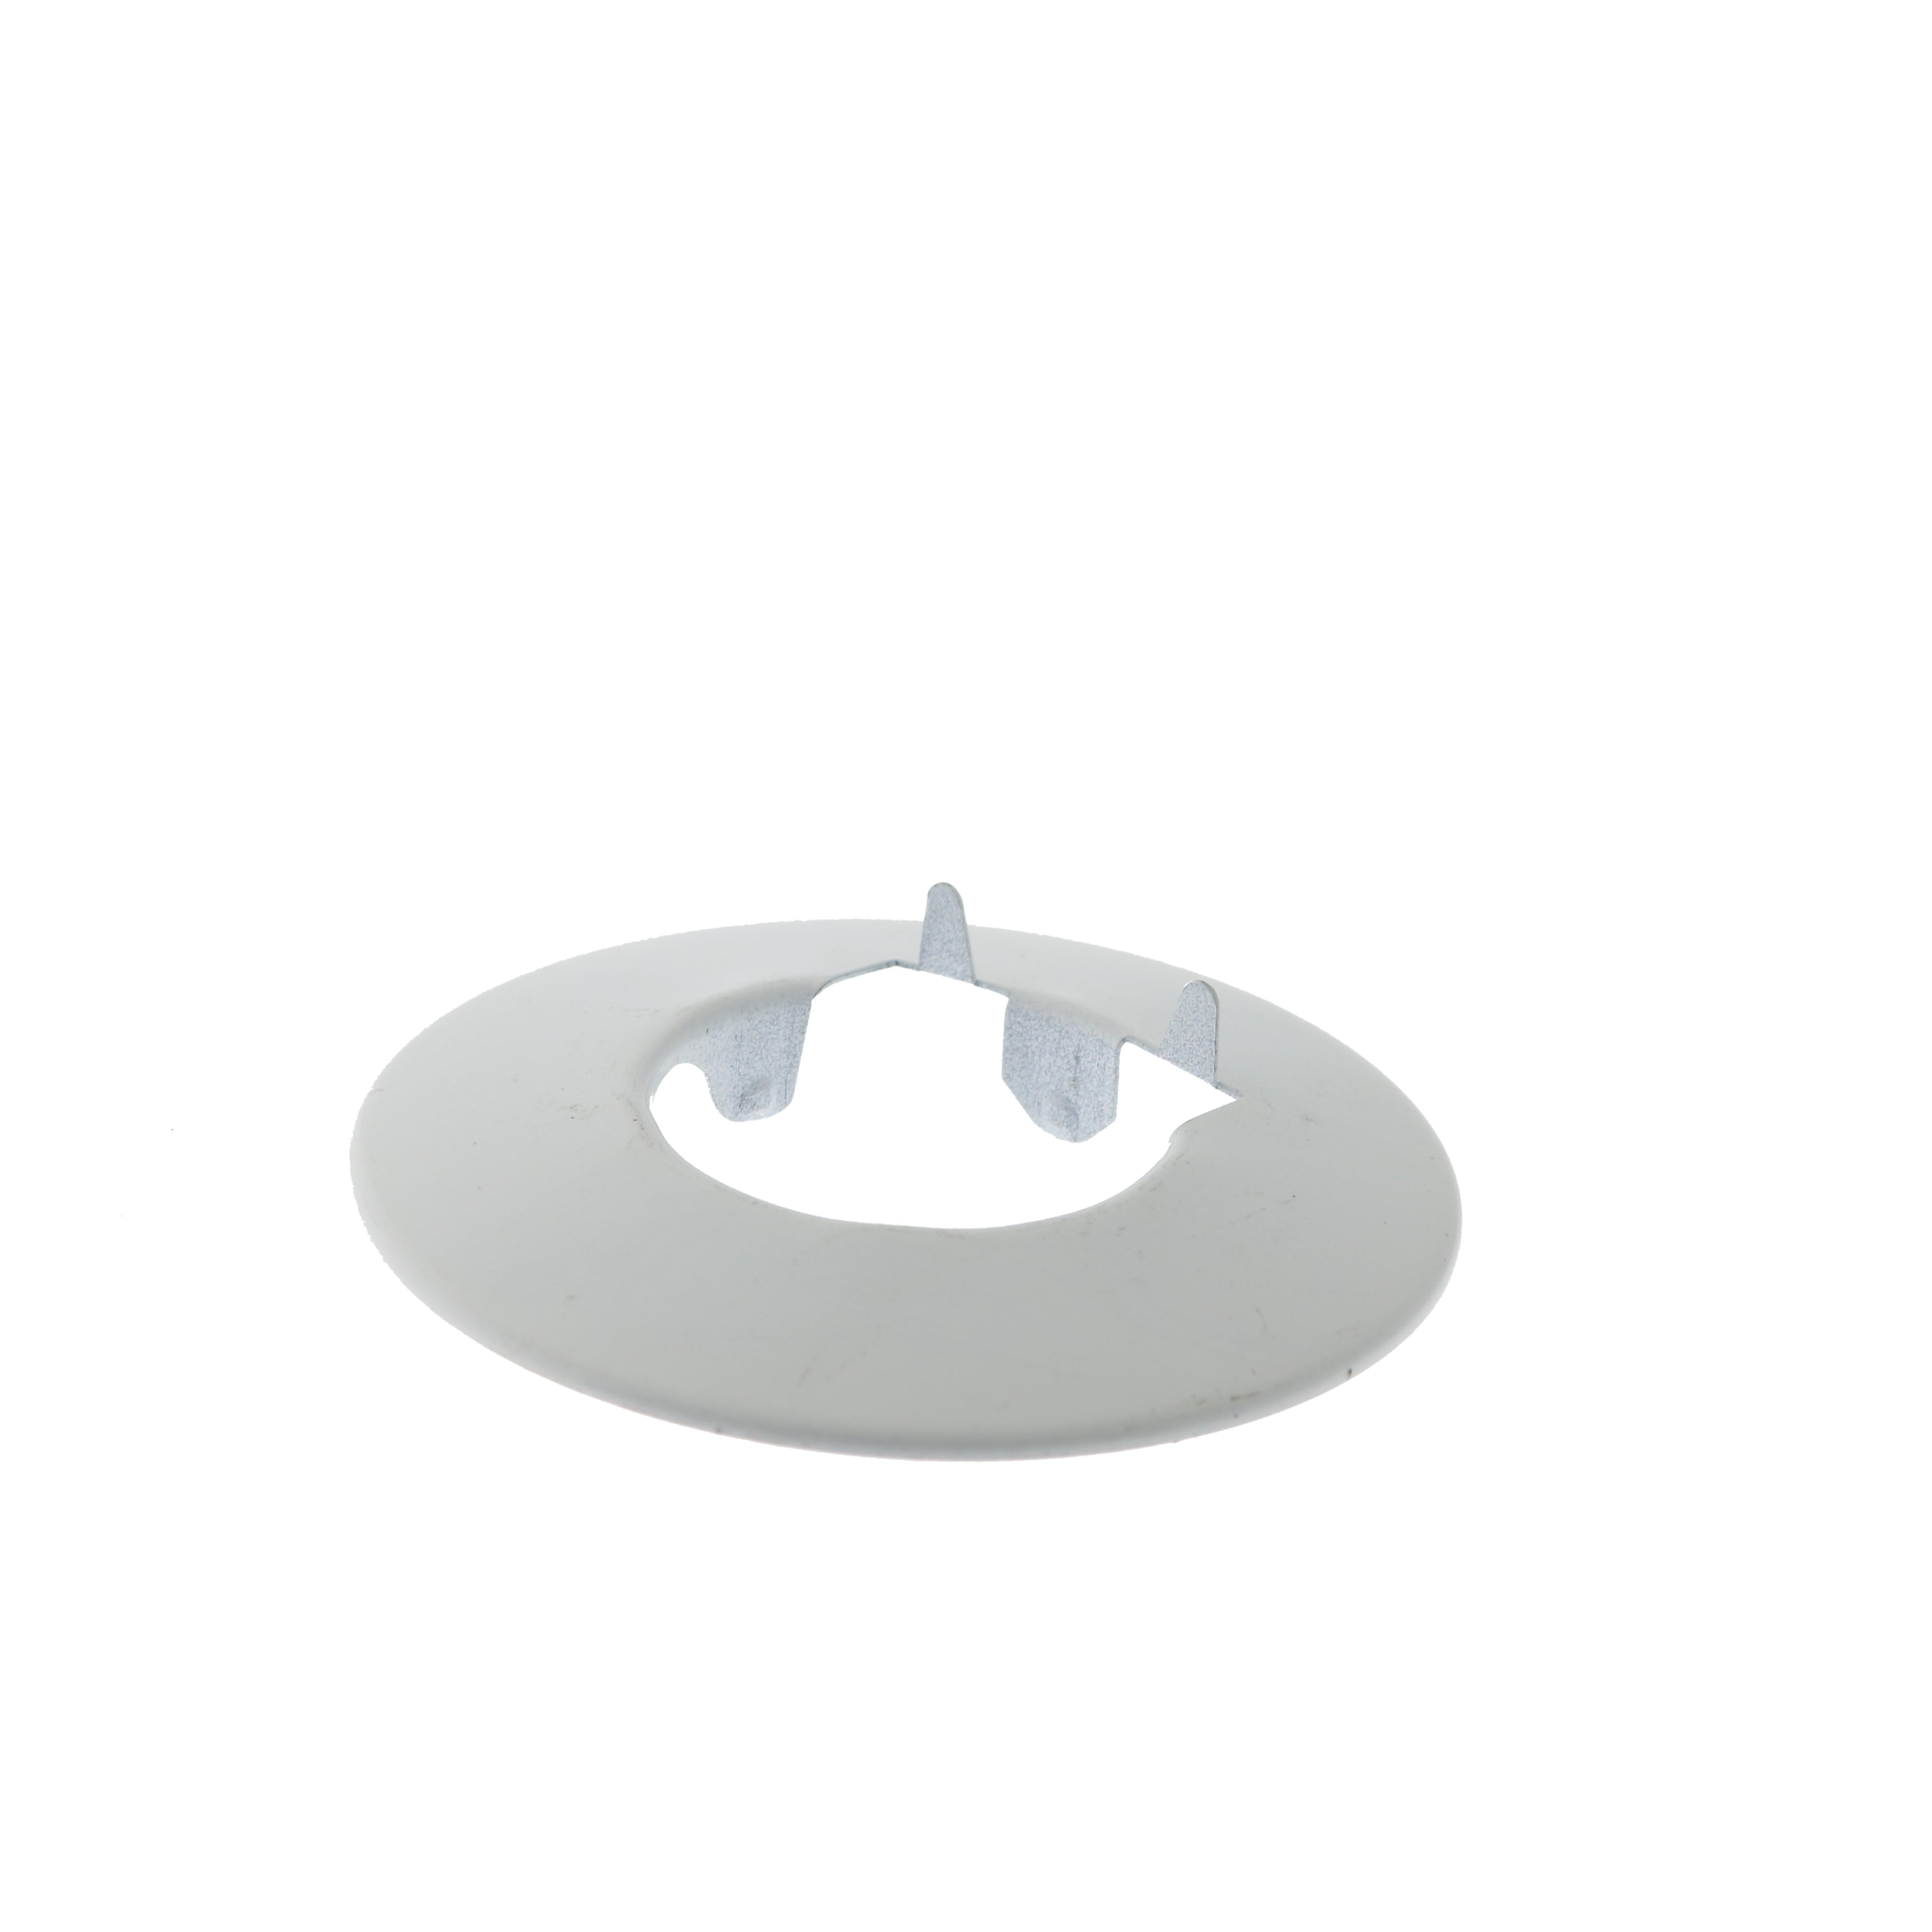 Tyco LFII Flush Horizontal Sidewall TY-QRF Escutcheon 1 Piece - Available In Multiple Colors - W1007